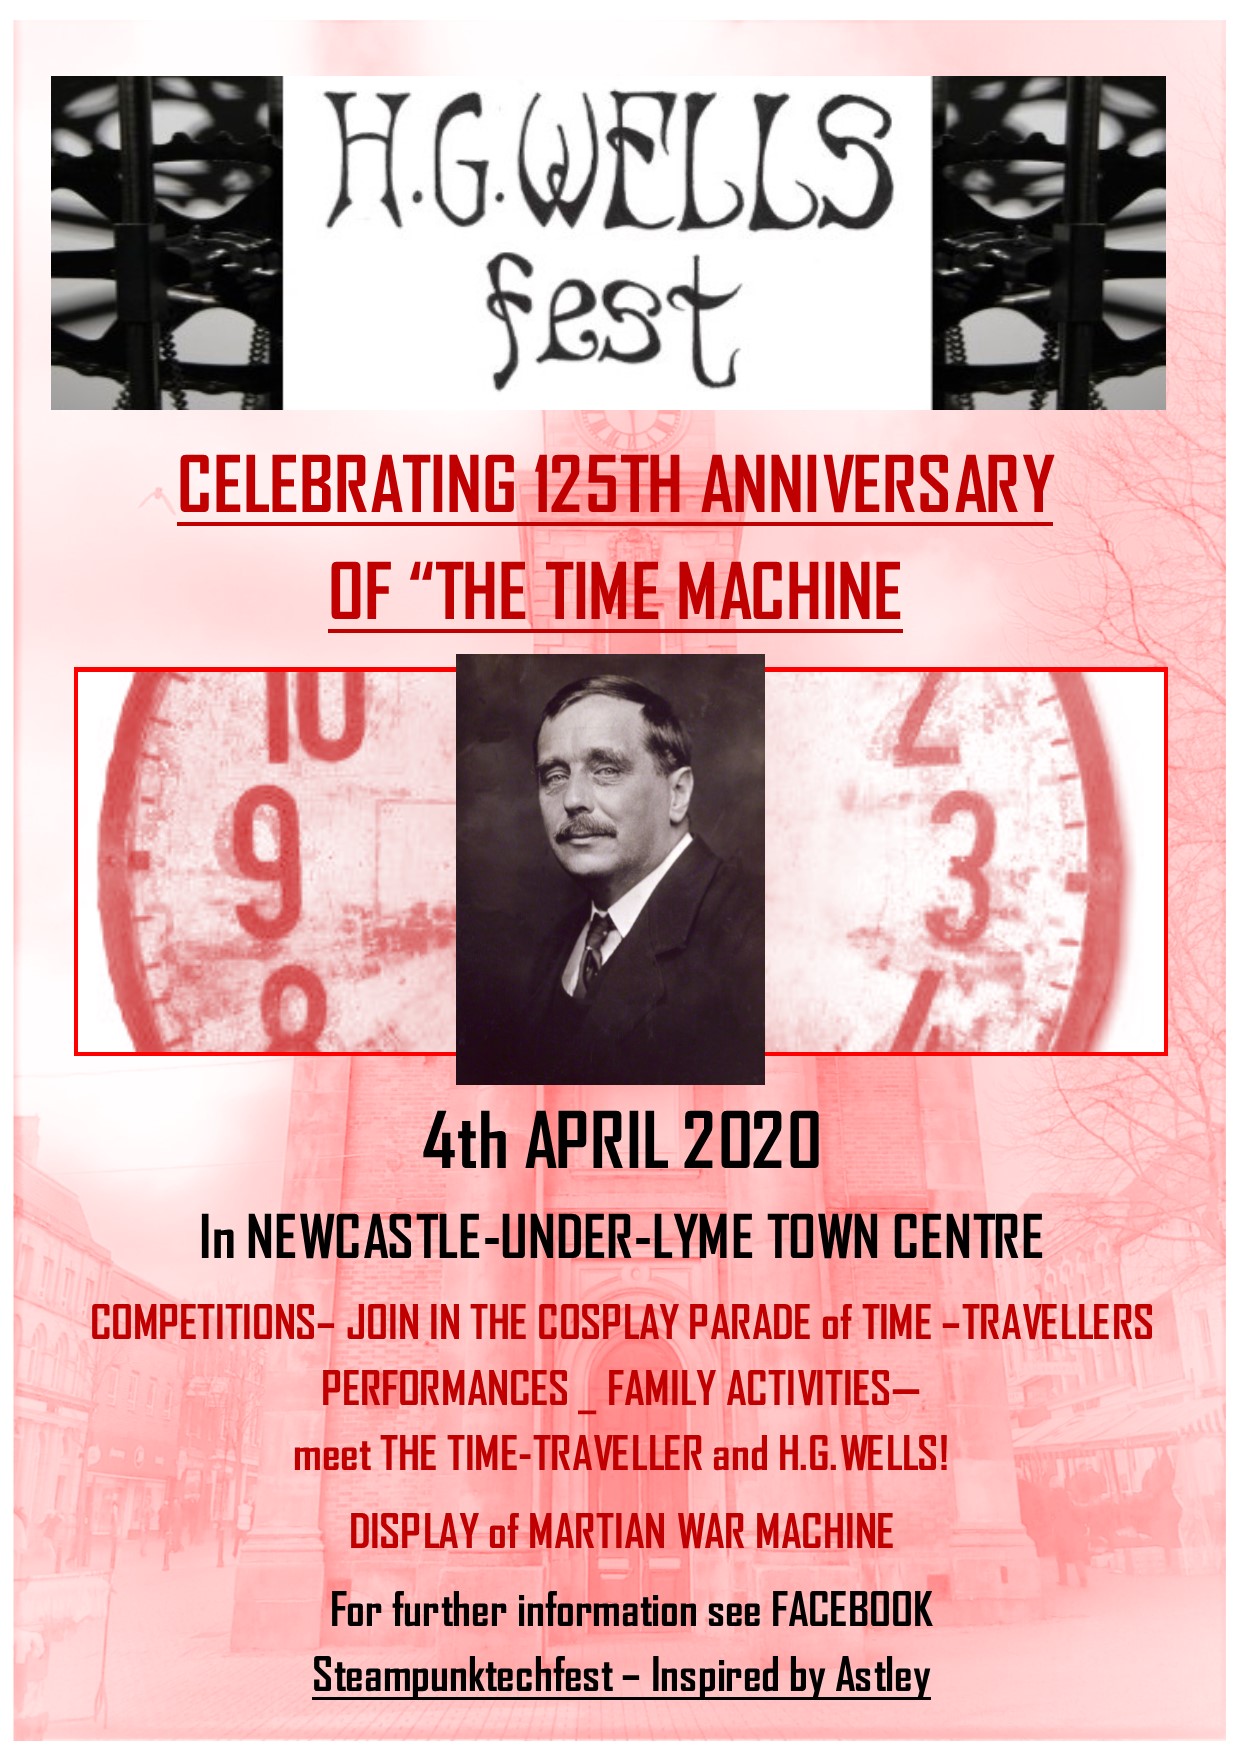 Exciting new event planned for NUL this April….